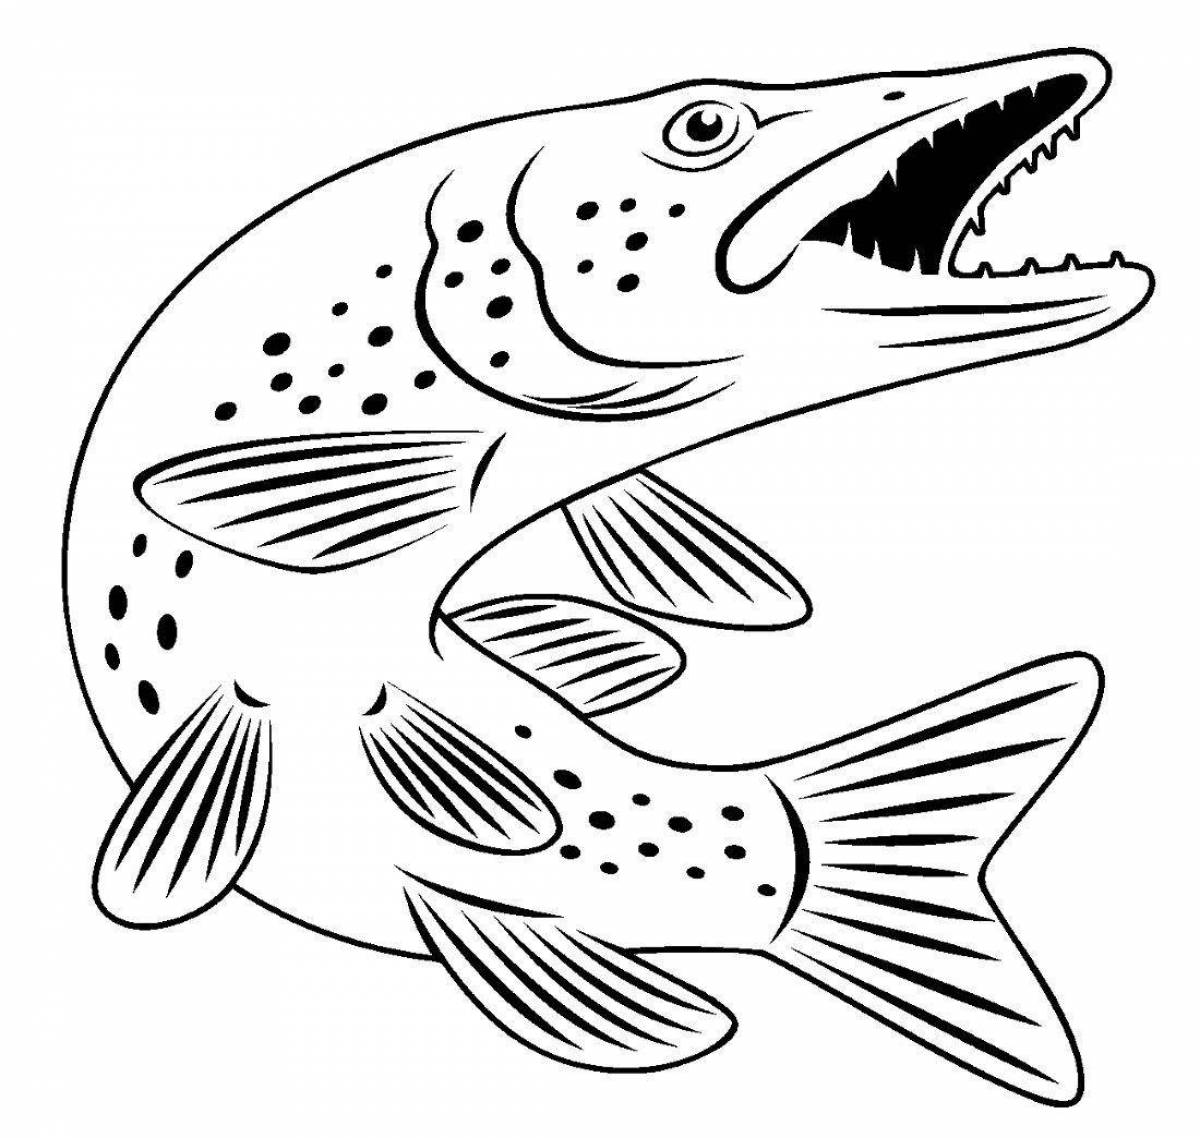 Colorful pike coloring page for kids